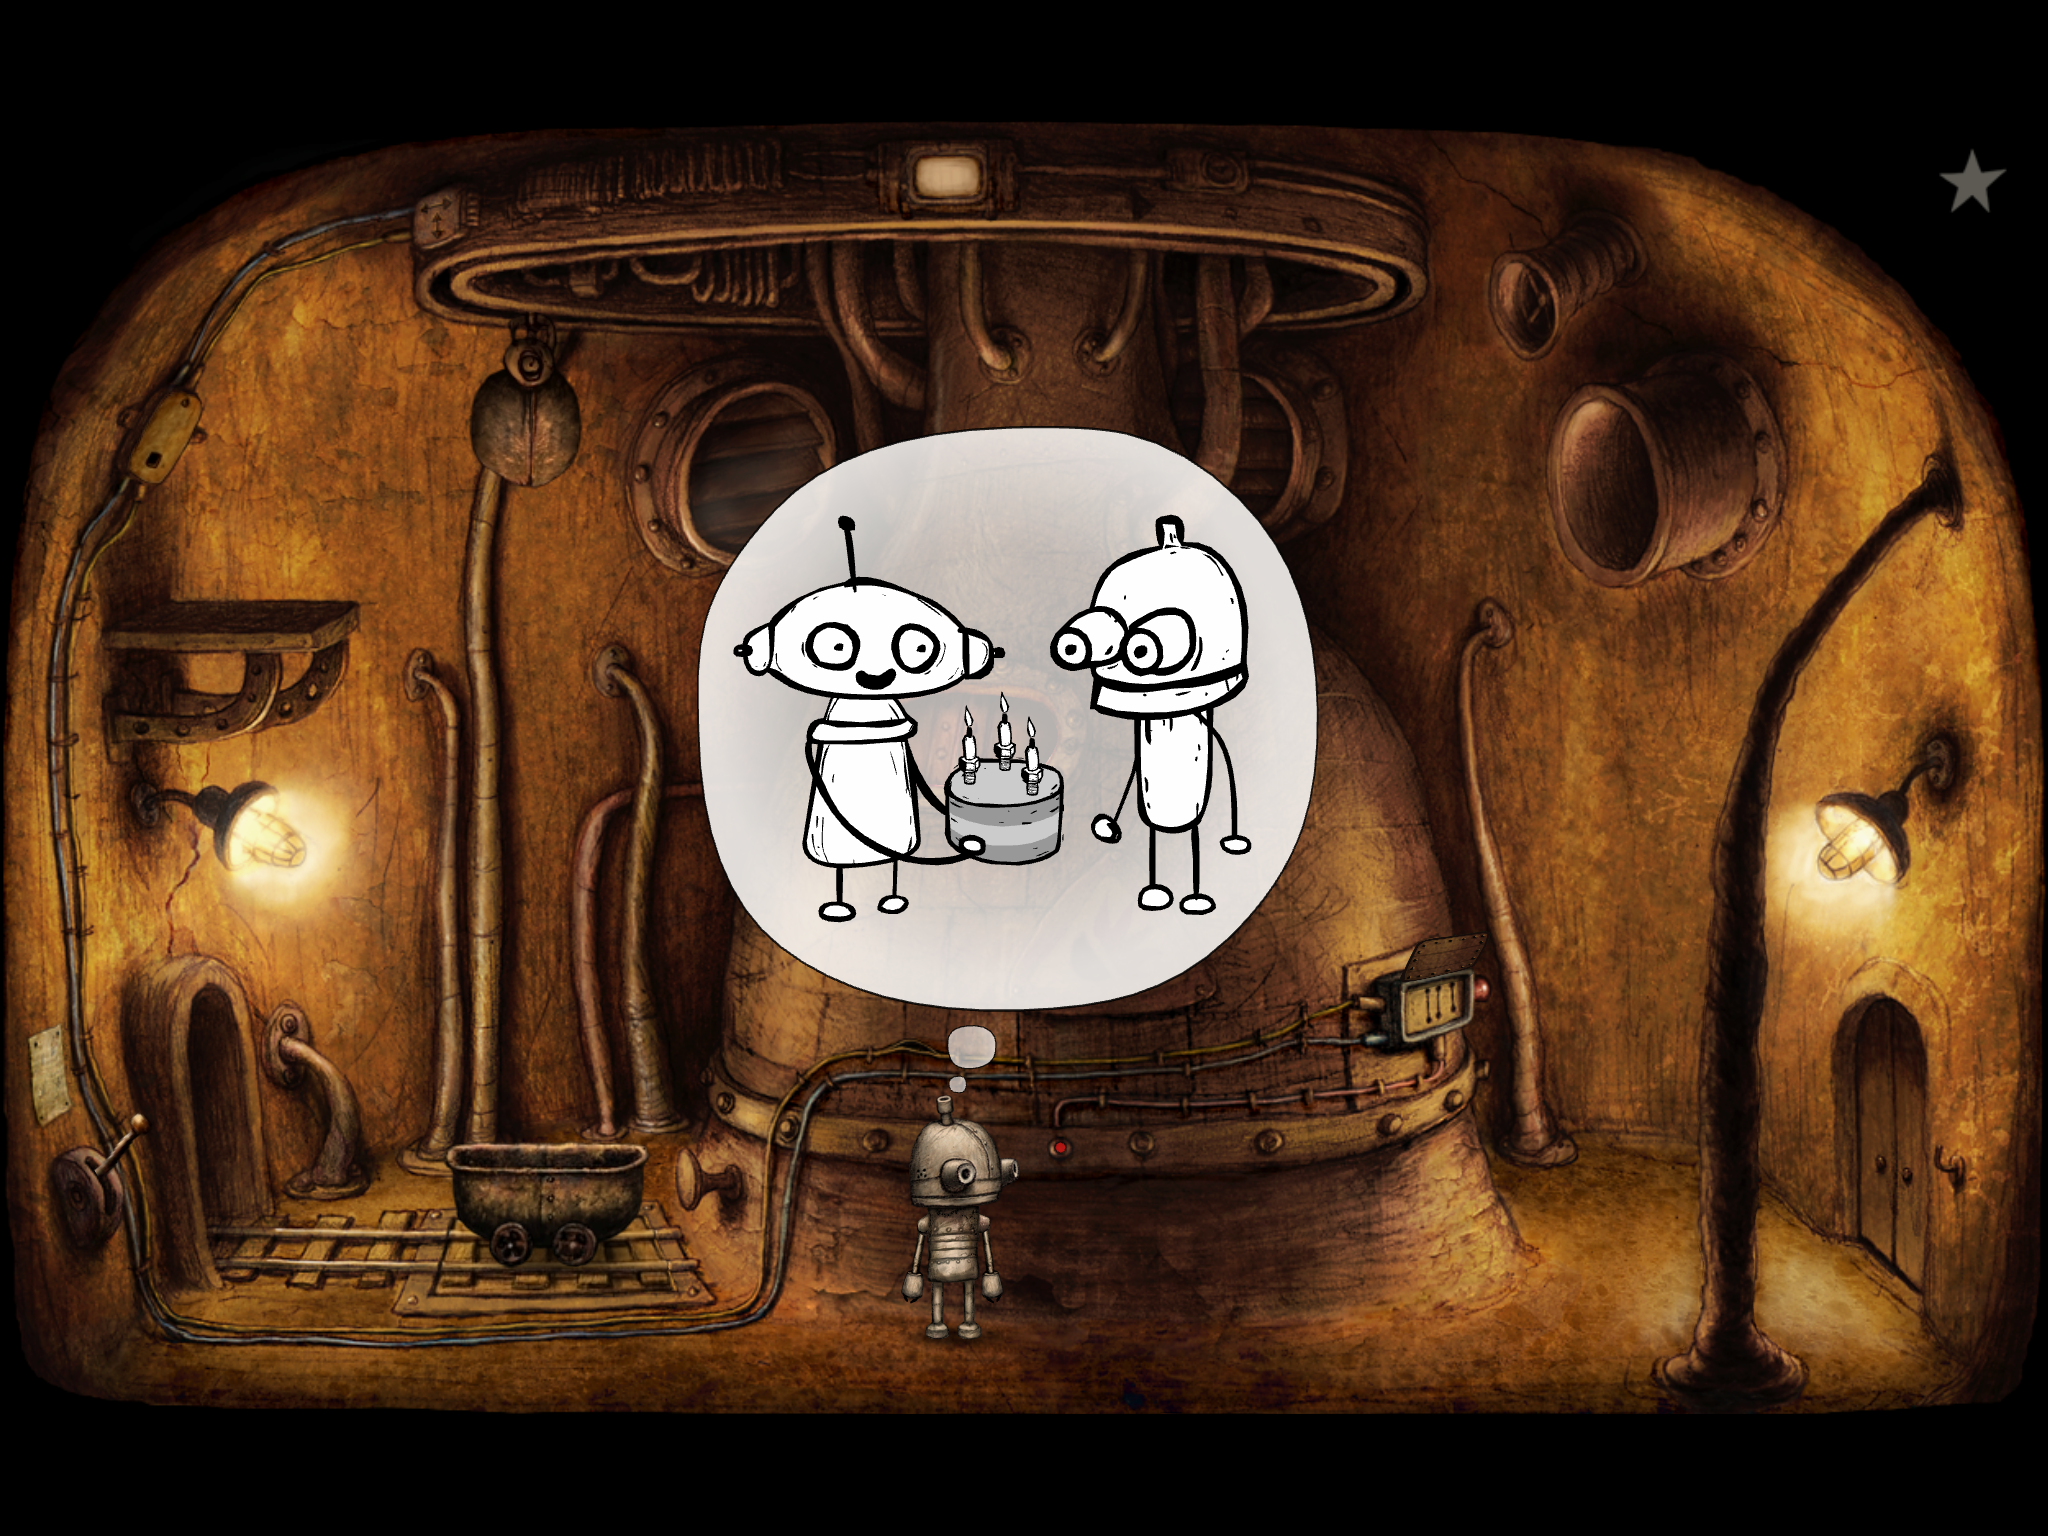 A scene with our robot hero in a room with a furnace in it, in Machinarium. The little robot is remembering his love giving him a birthday cake, as depeicted by a cartoon in a bubble above his head.